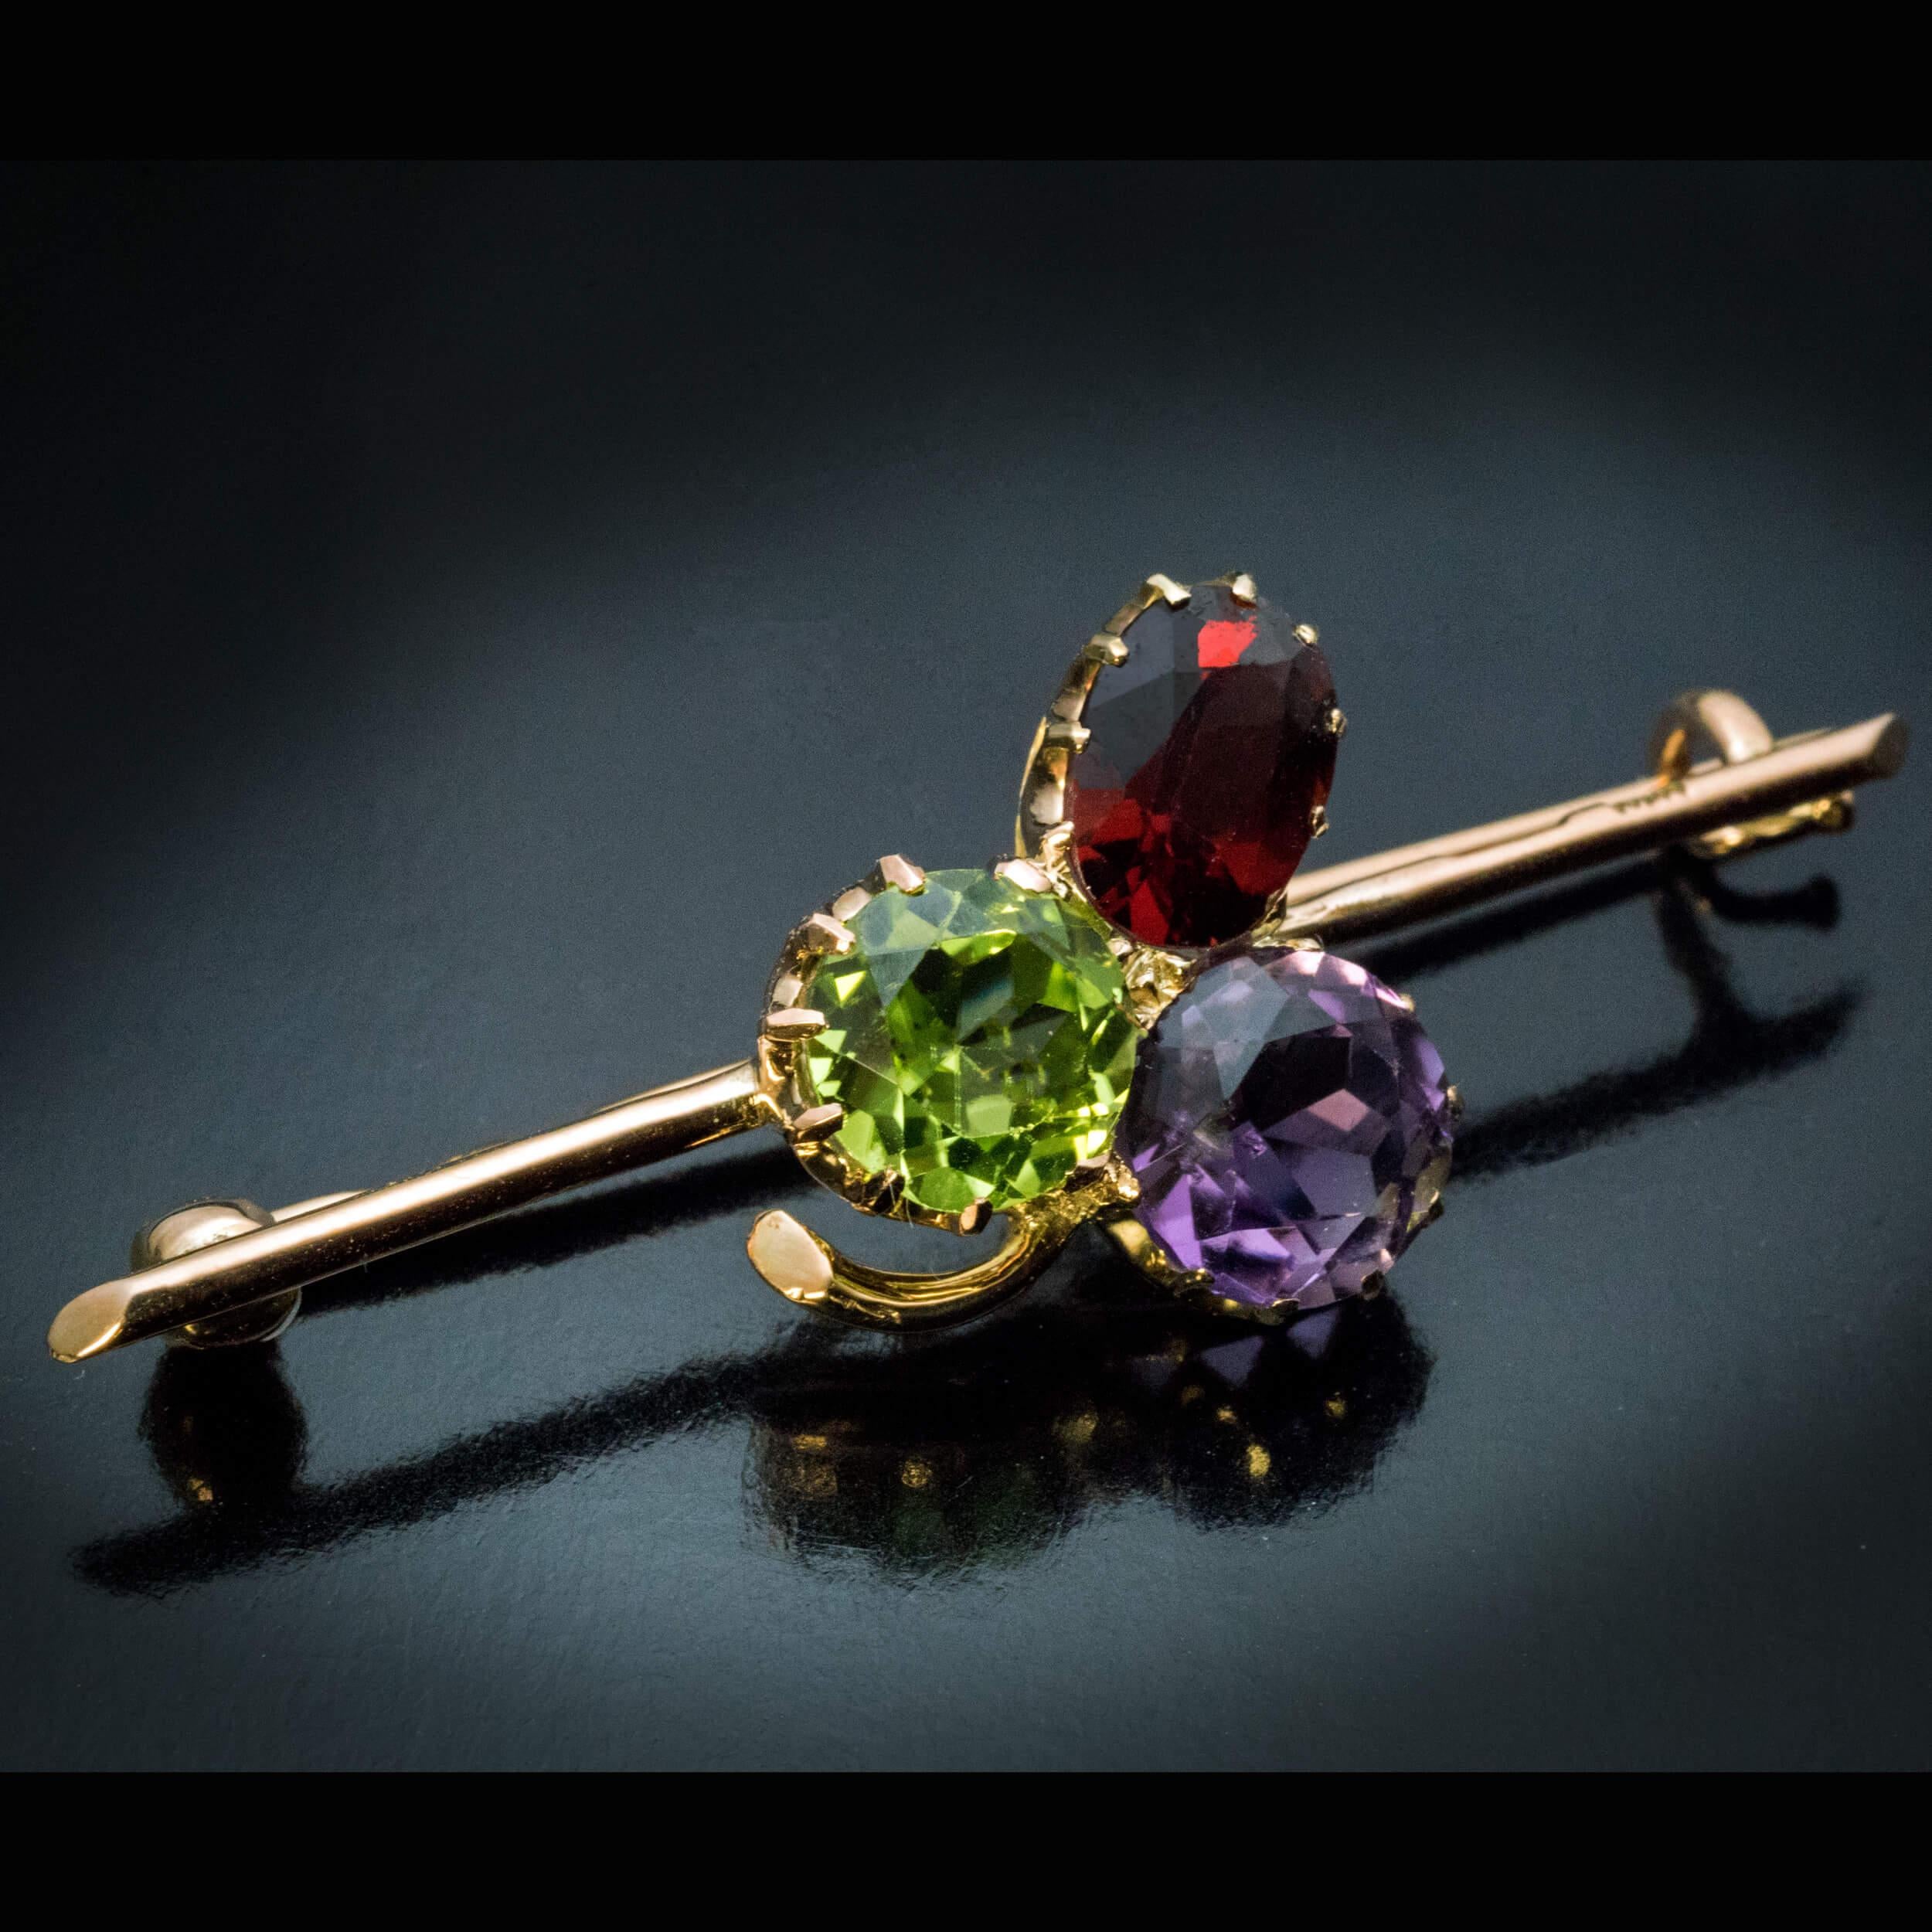 Made in Moscow between 1899 and 1908.
The 14K gold trefoil brooch is set with a dark red garnet, a bright apple green chrysolite and a lavender purple amethyst.
The brooch is marked with 56 zolotnik Imperial gold standard with assayer’s initials